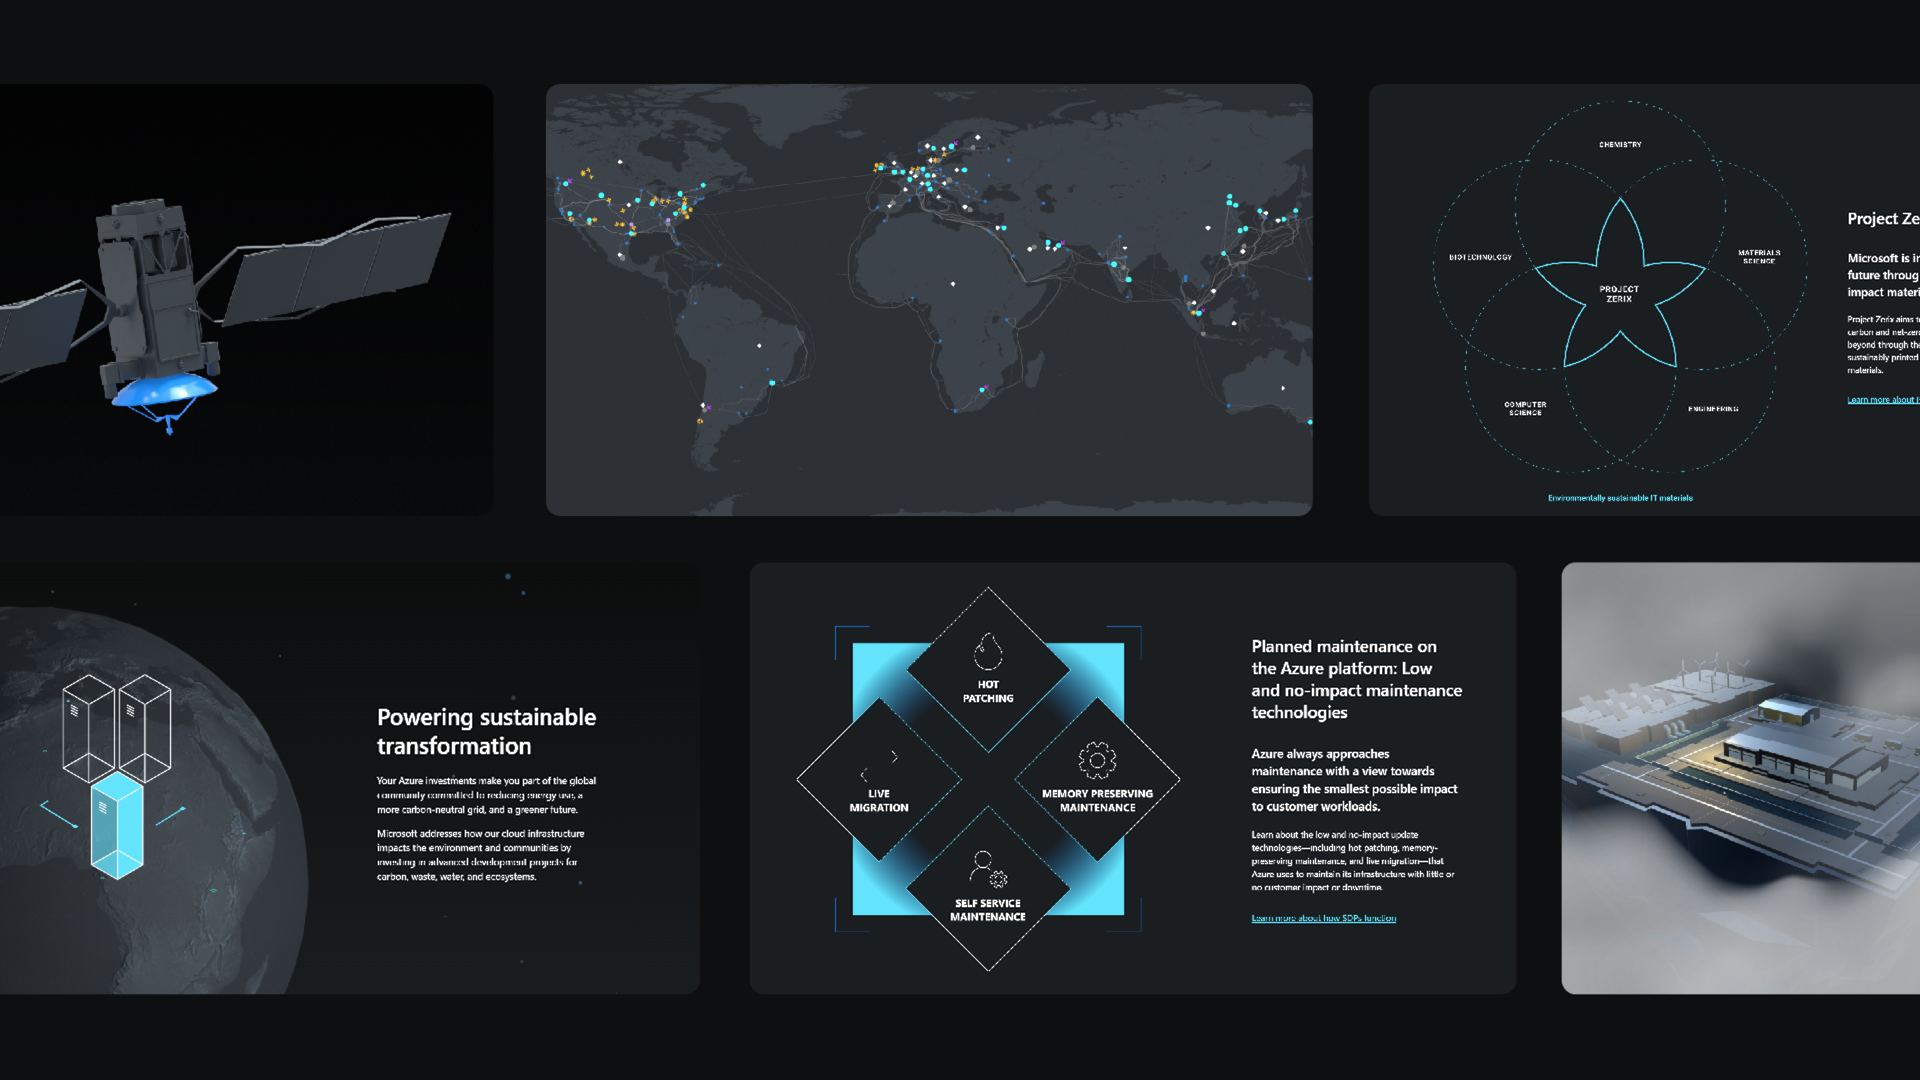 Satellites in the sky with mapping elements